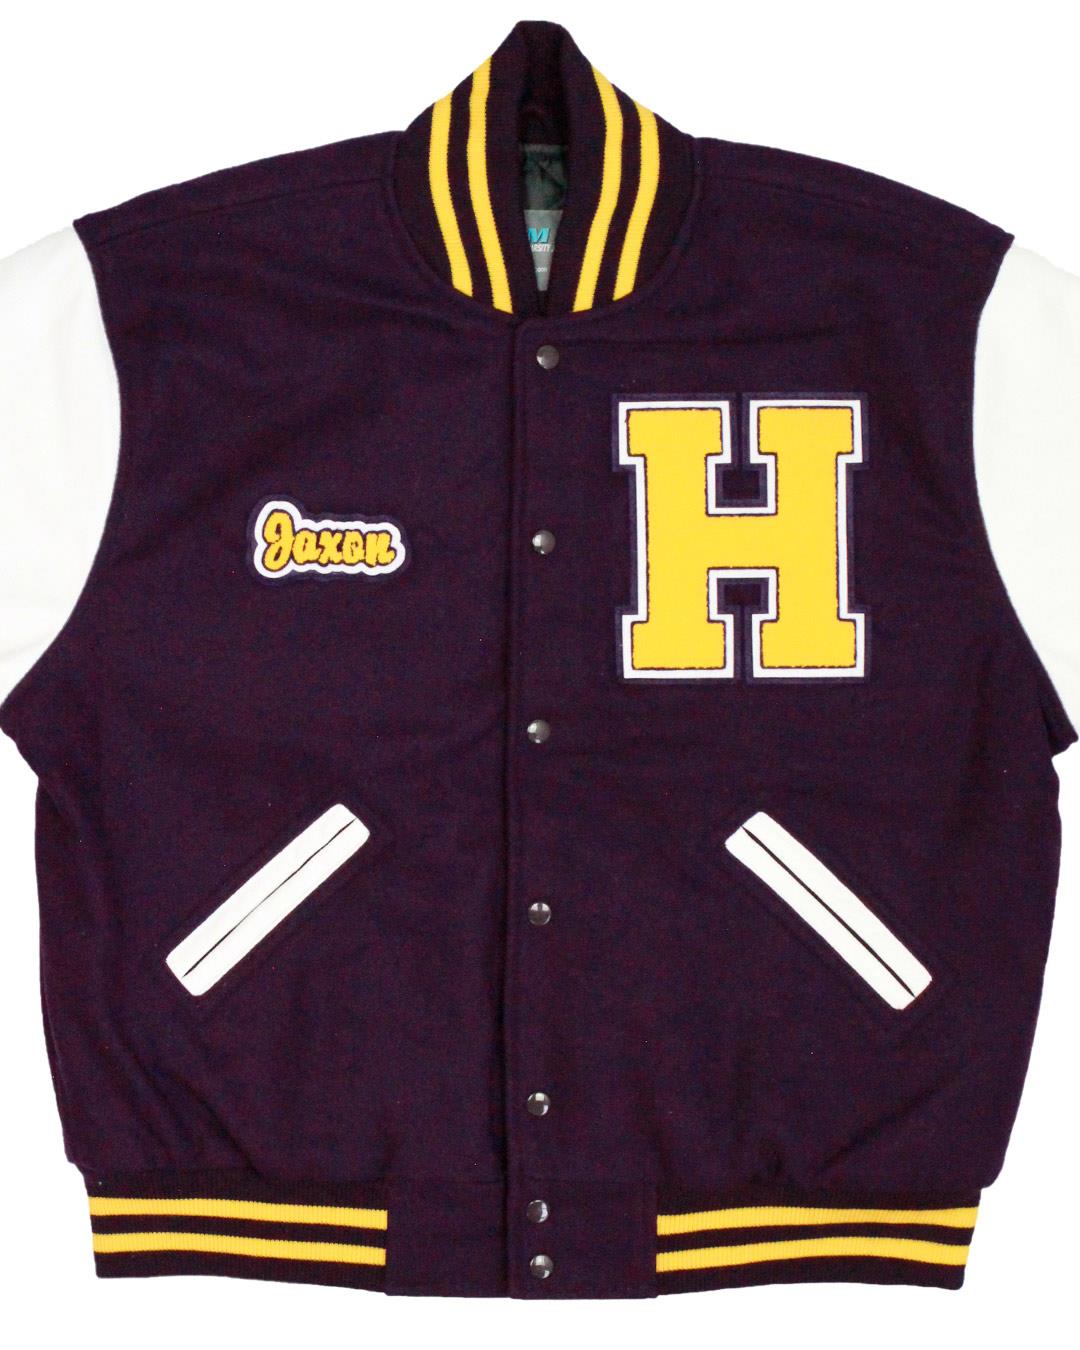 Hanford High School Falcons Letter Jacket, Richland, WA - Front